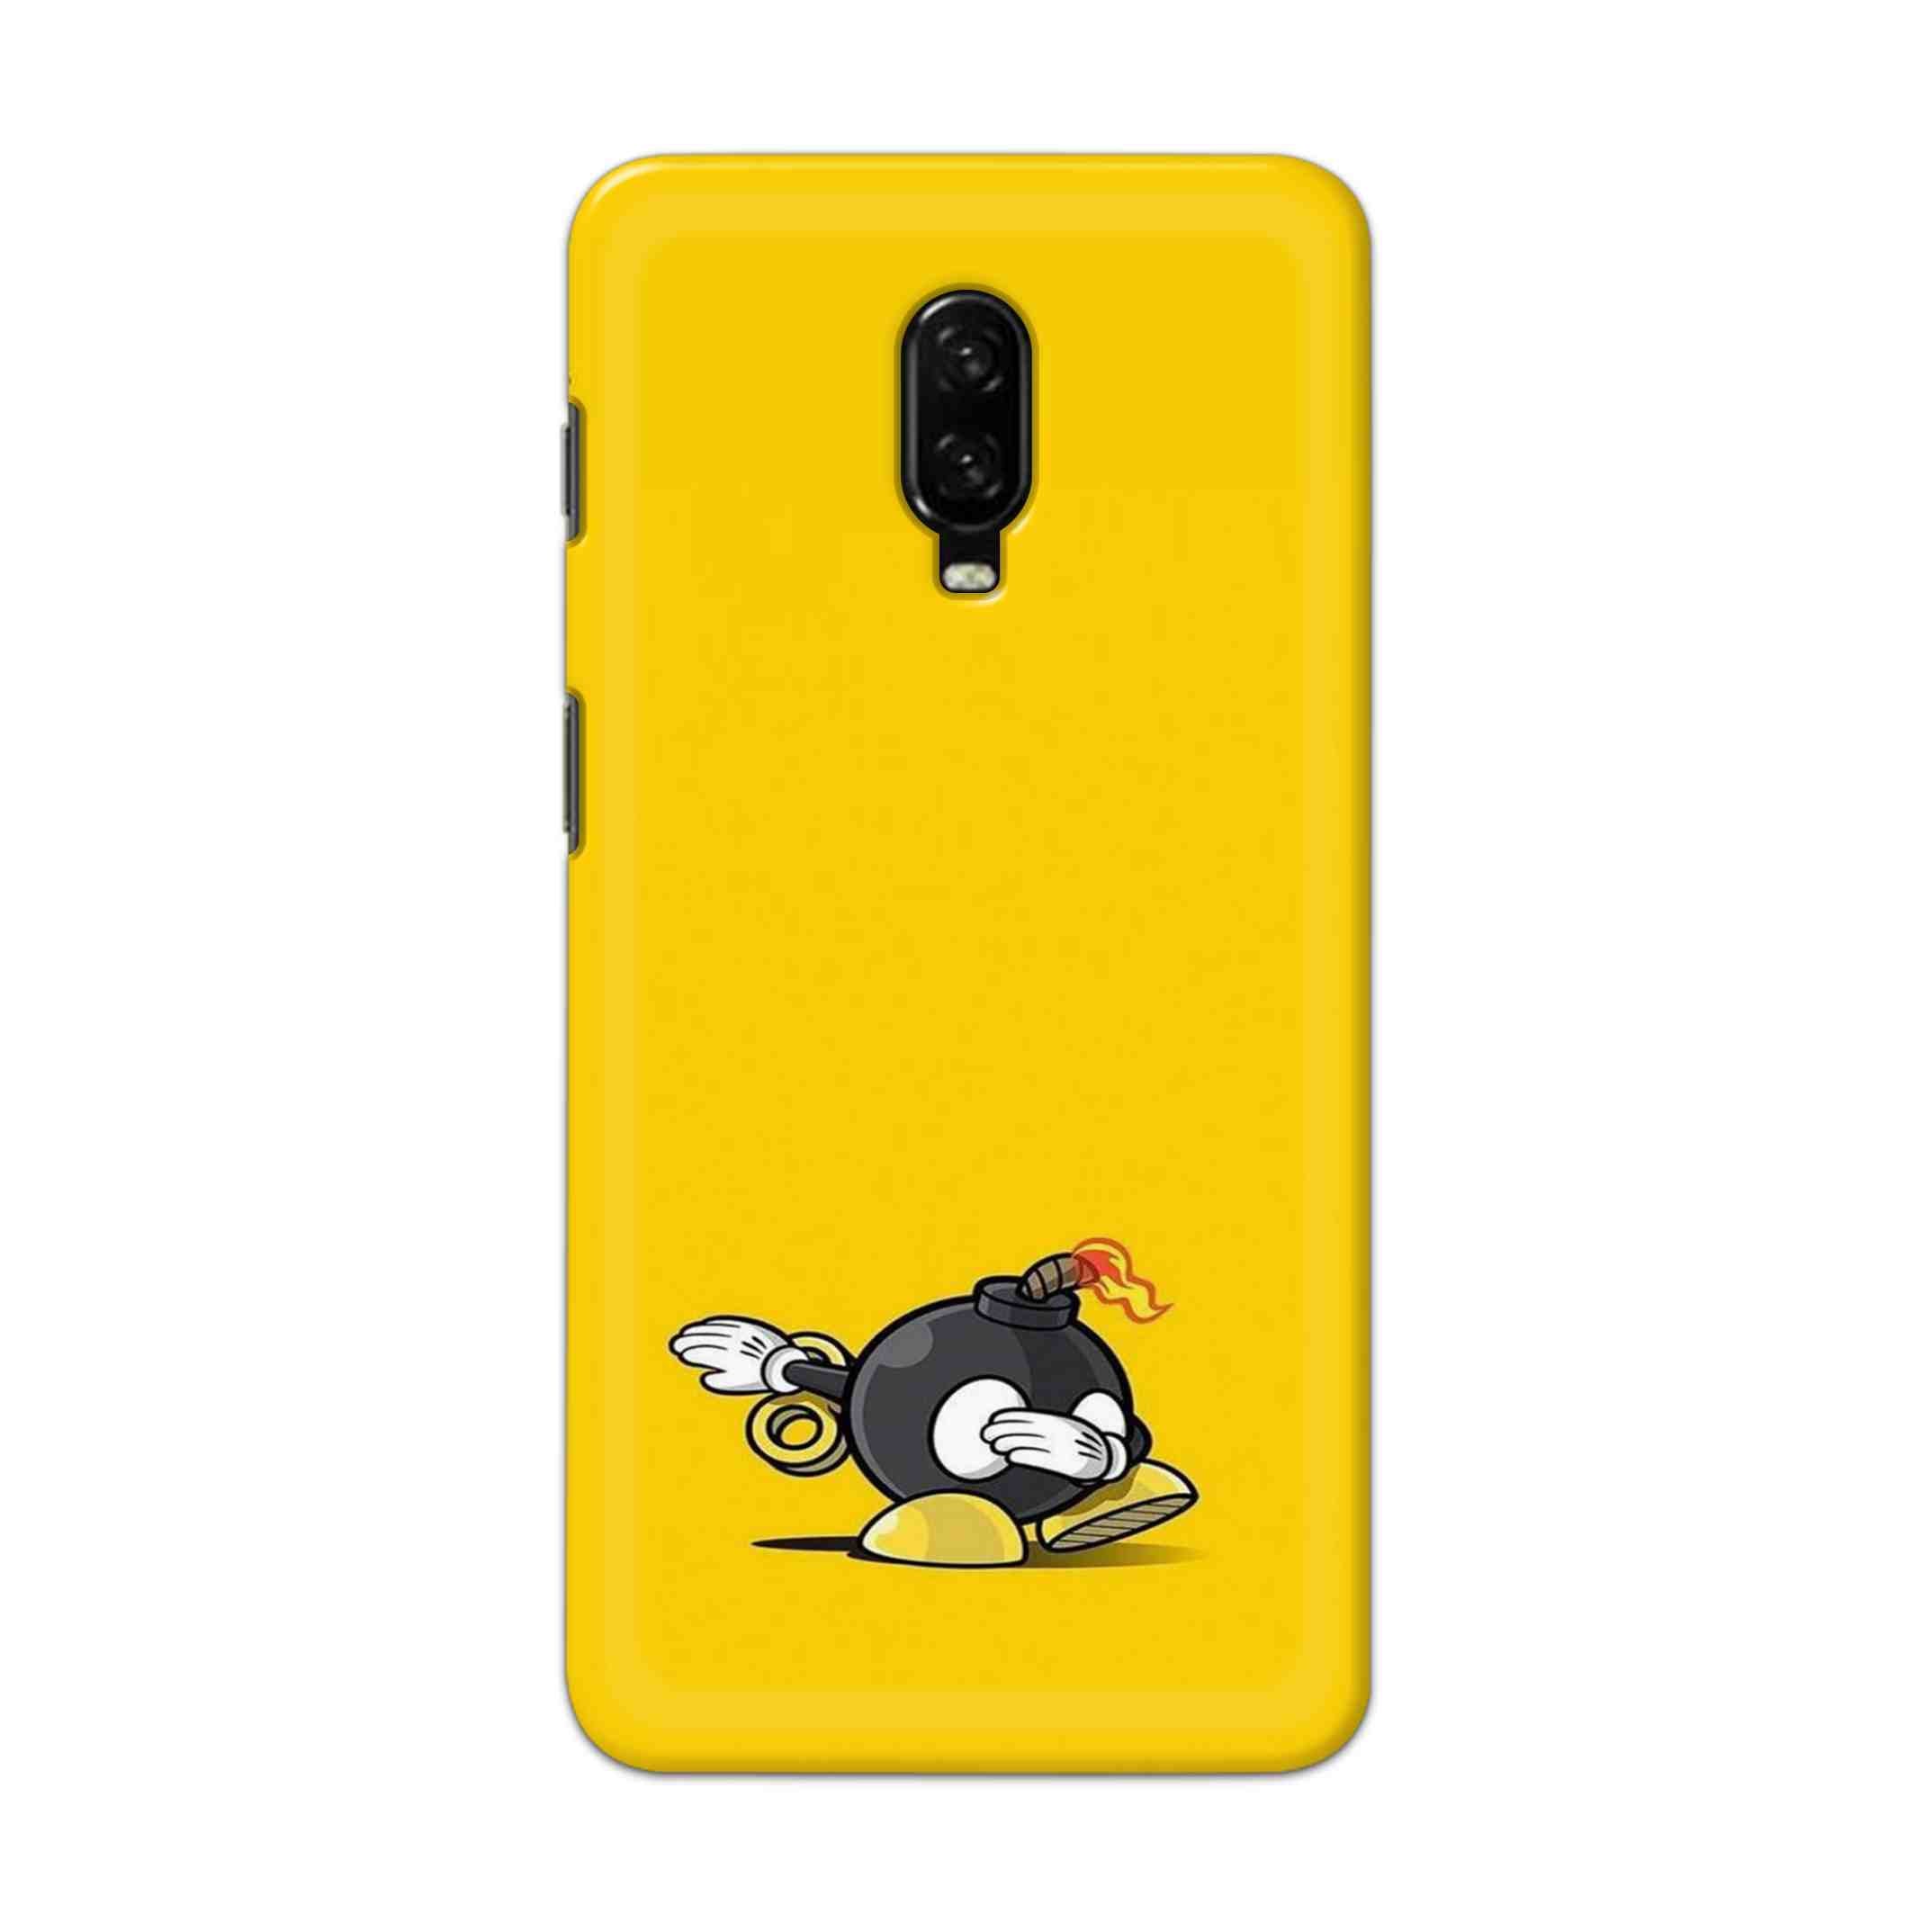 Buy Dashing Bomb Hard Back Mobile Phone Case Cover For OnePlus 6T Online